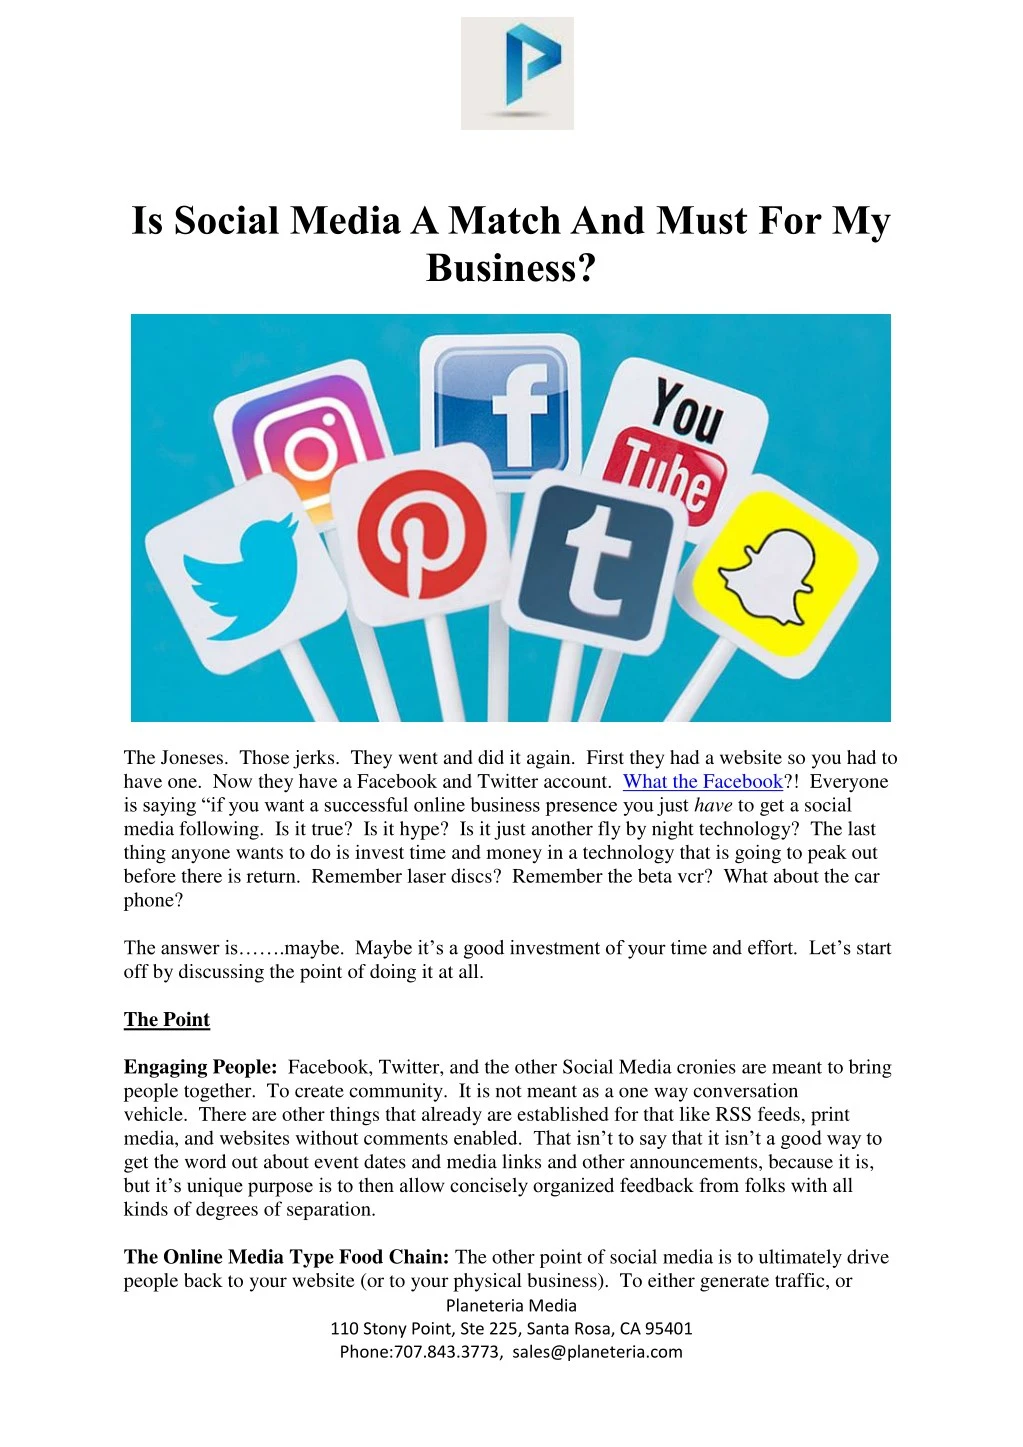 is social media a match and must for my business